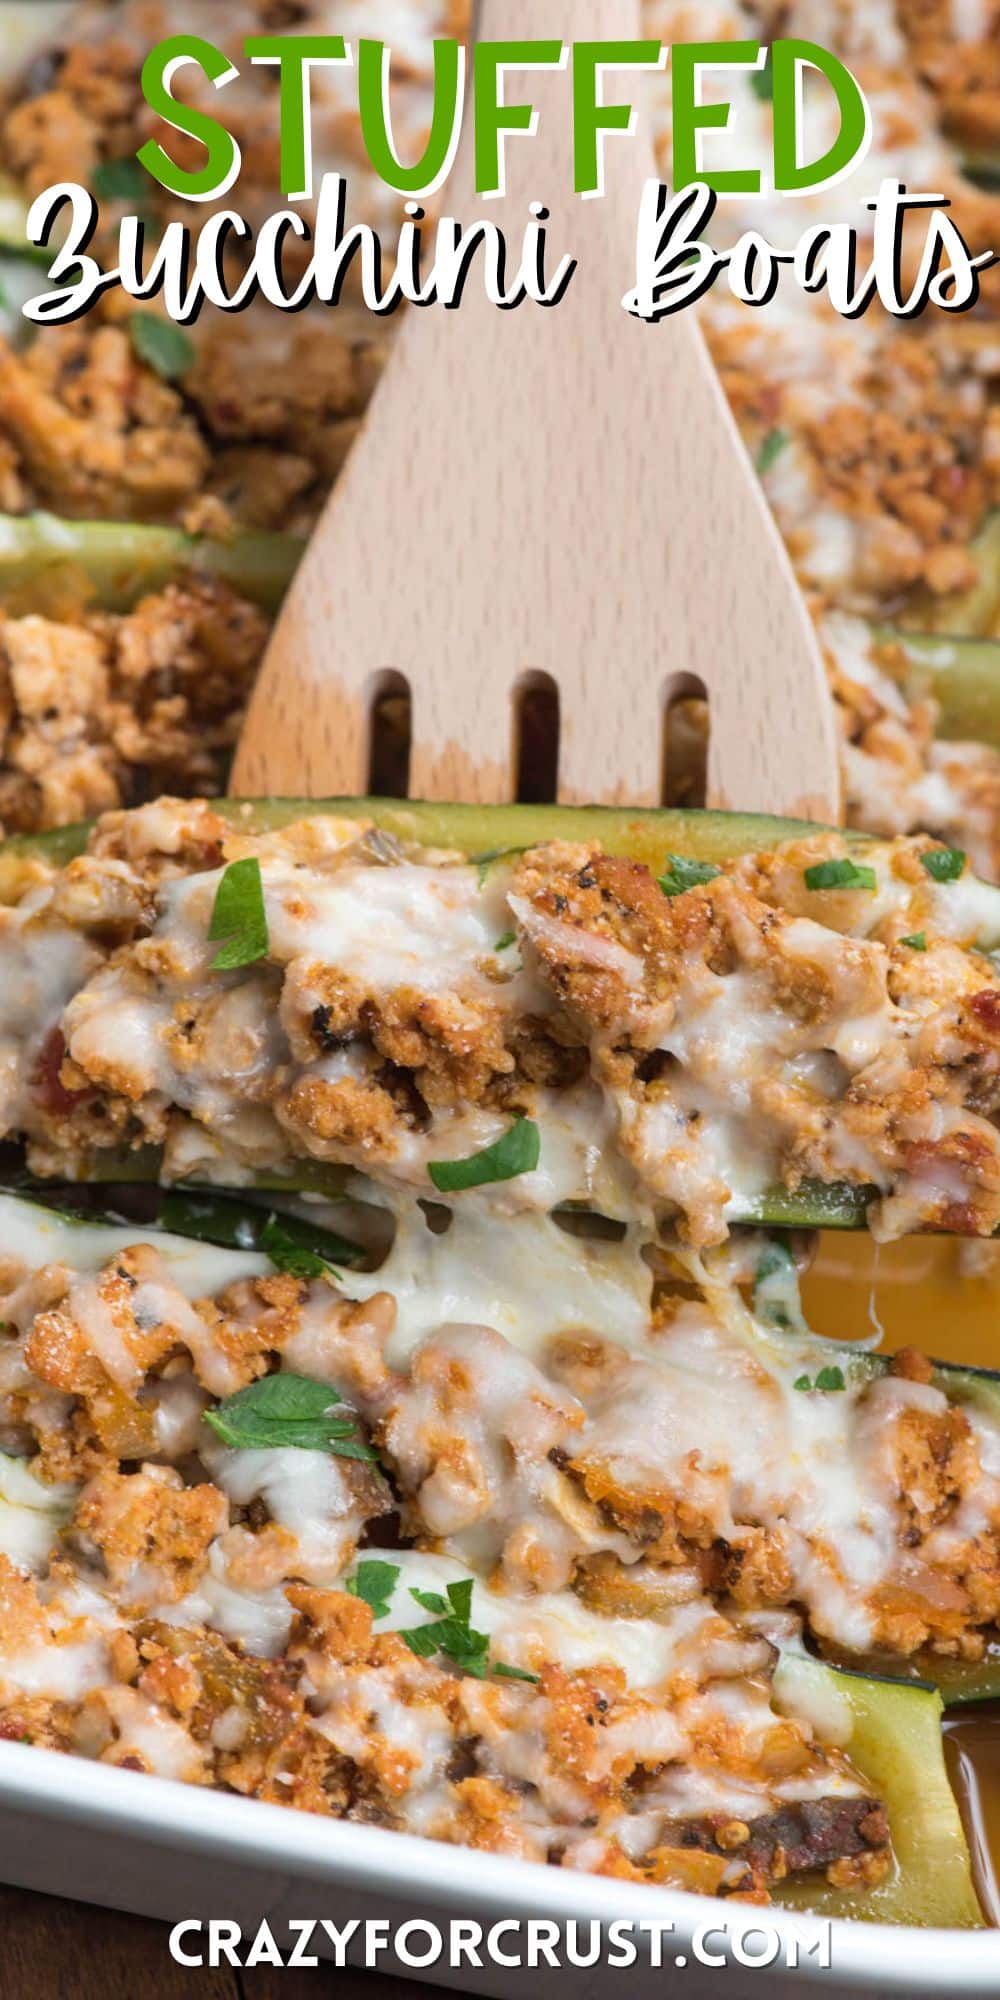 zucchini with meat and cheese inside with words on the image.